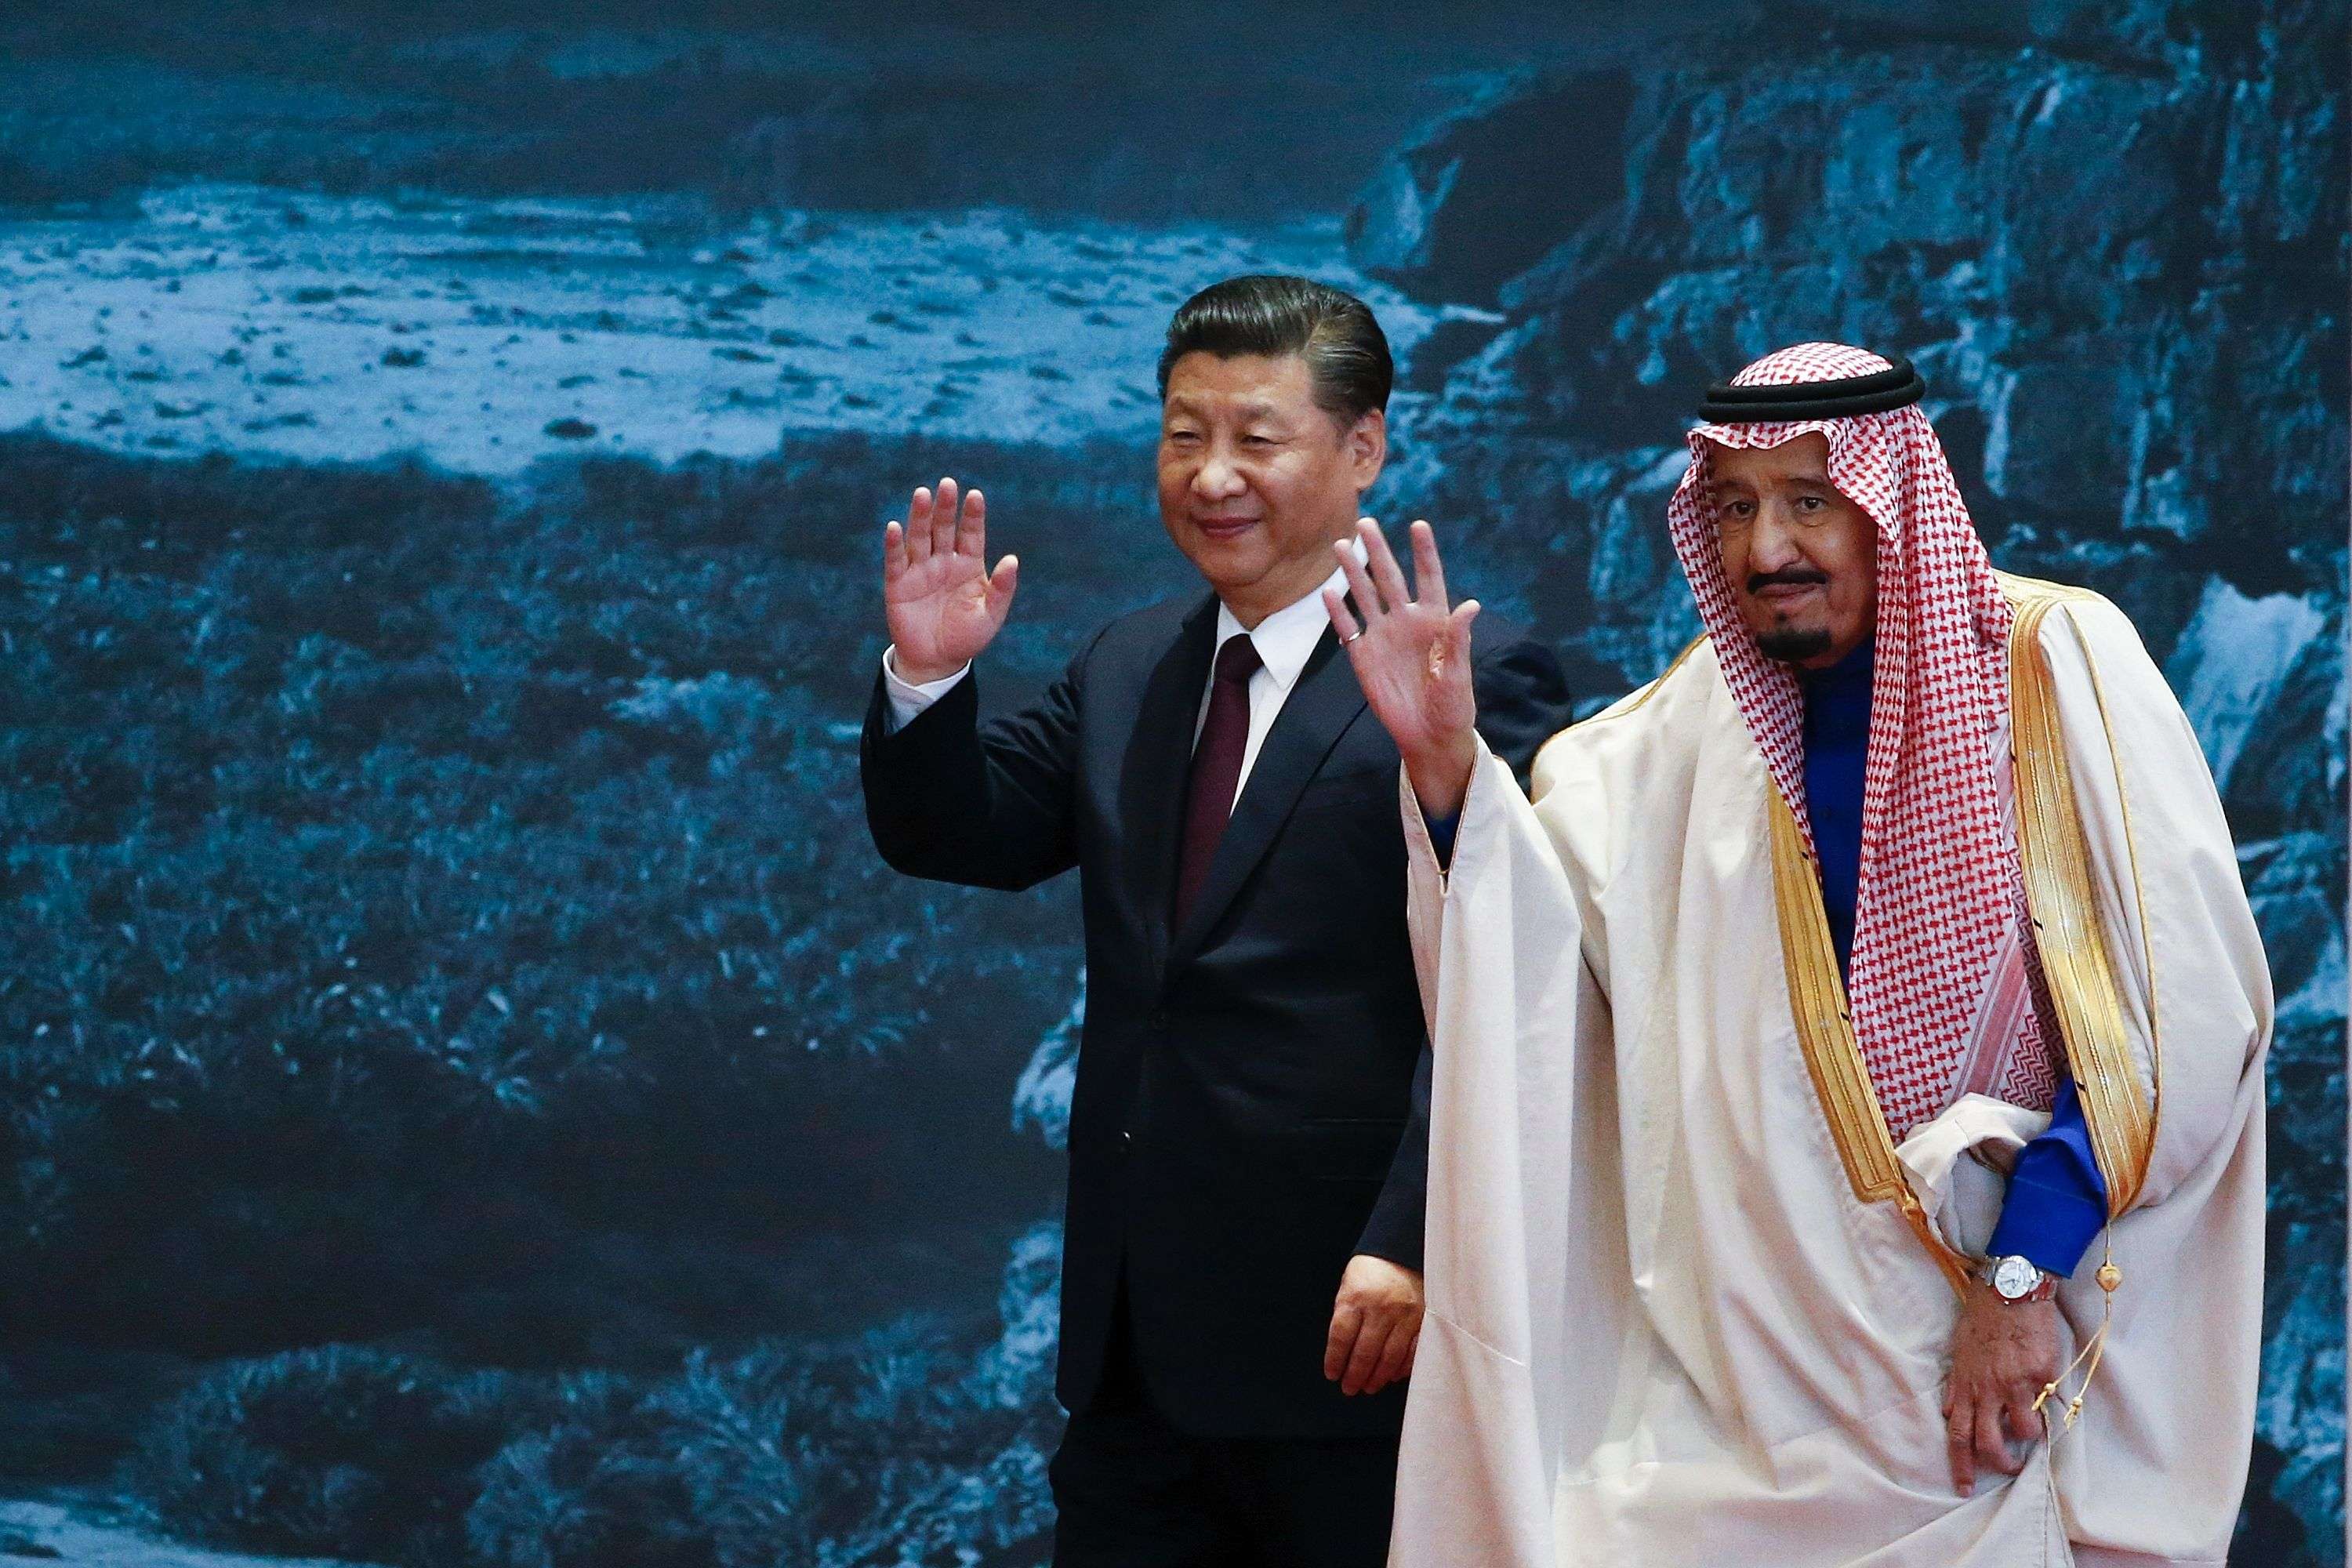 When President Xi Jinping hosted Saudi King Salman in Beijing last month, the main agenda was trade and investment. In fact, China has a much broader role in the Middle East – a role which could easily drag it politically and militarily into a web of regional tensions that Beijing doesn’t have the expertise to handle. Photo: AFP